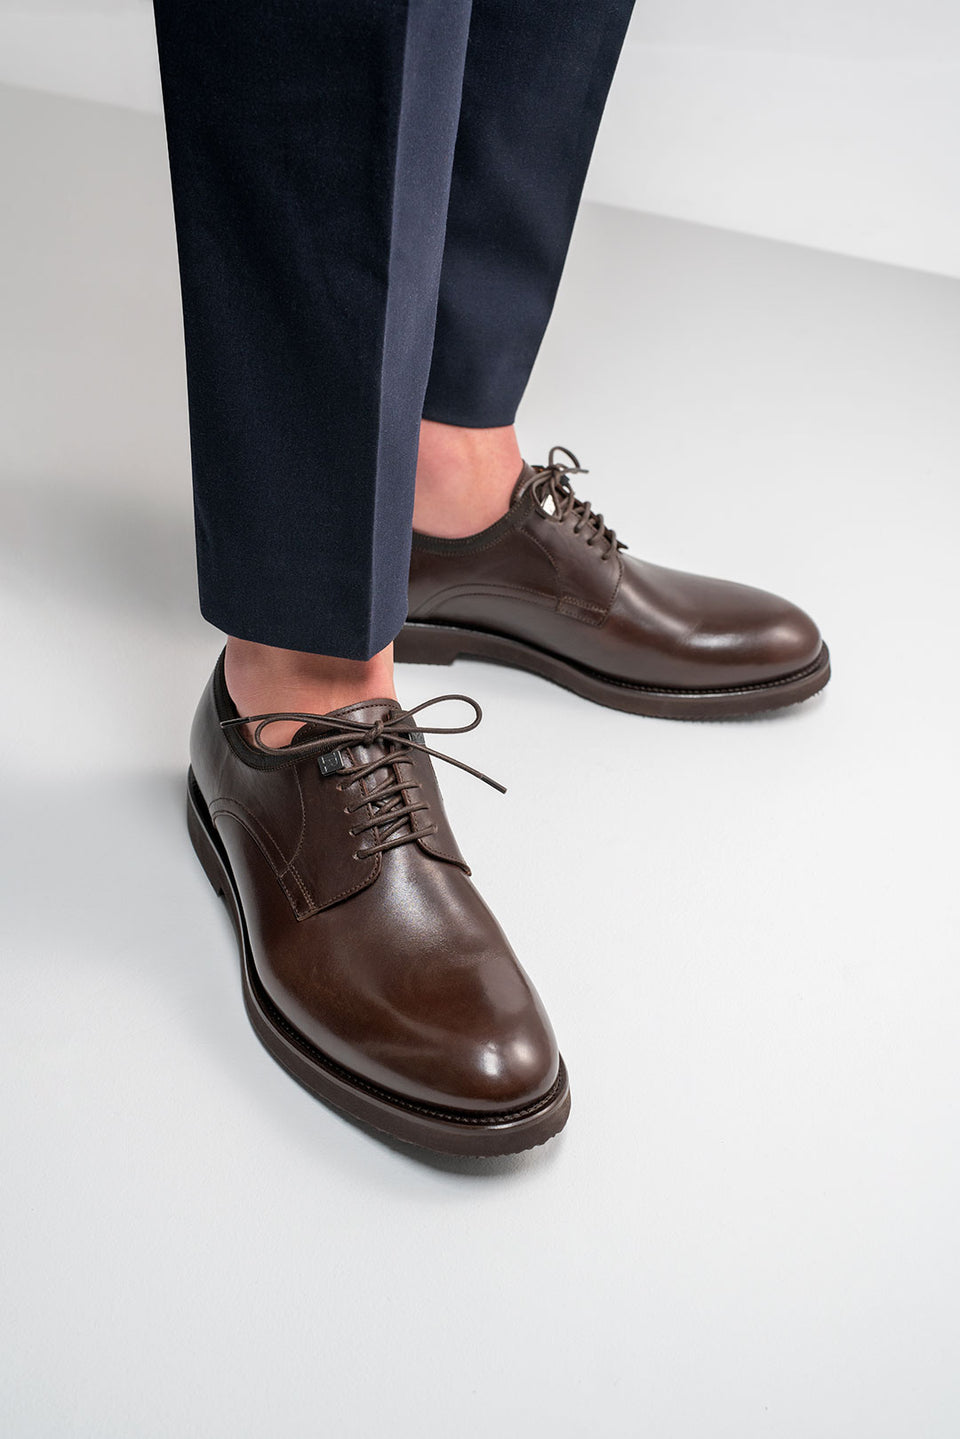 most comfortable brown leather shoes